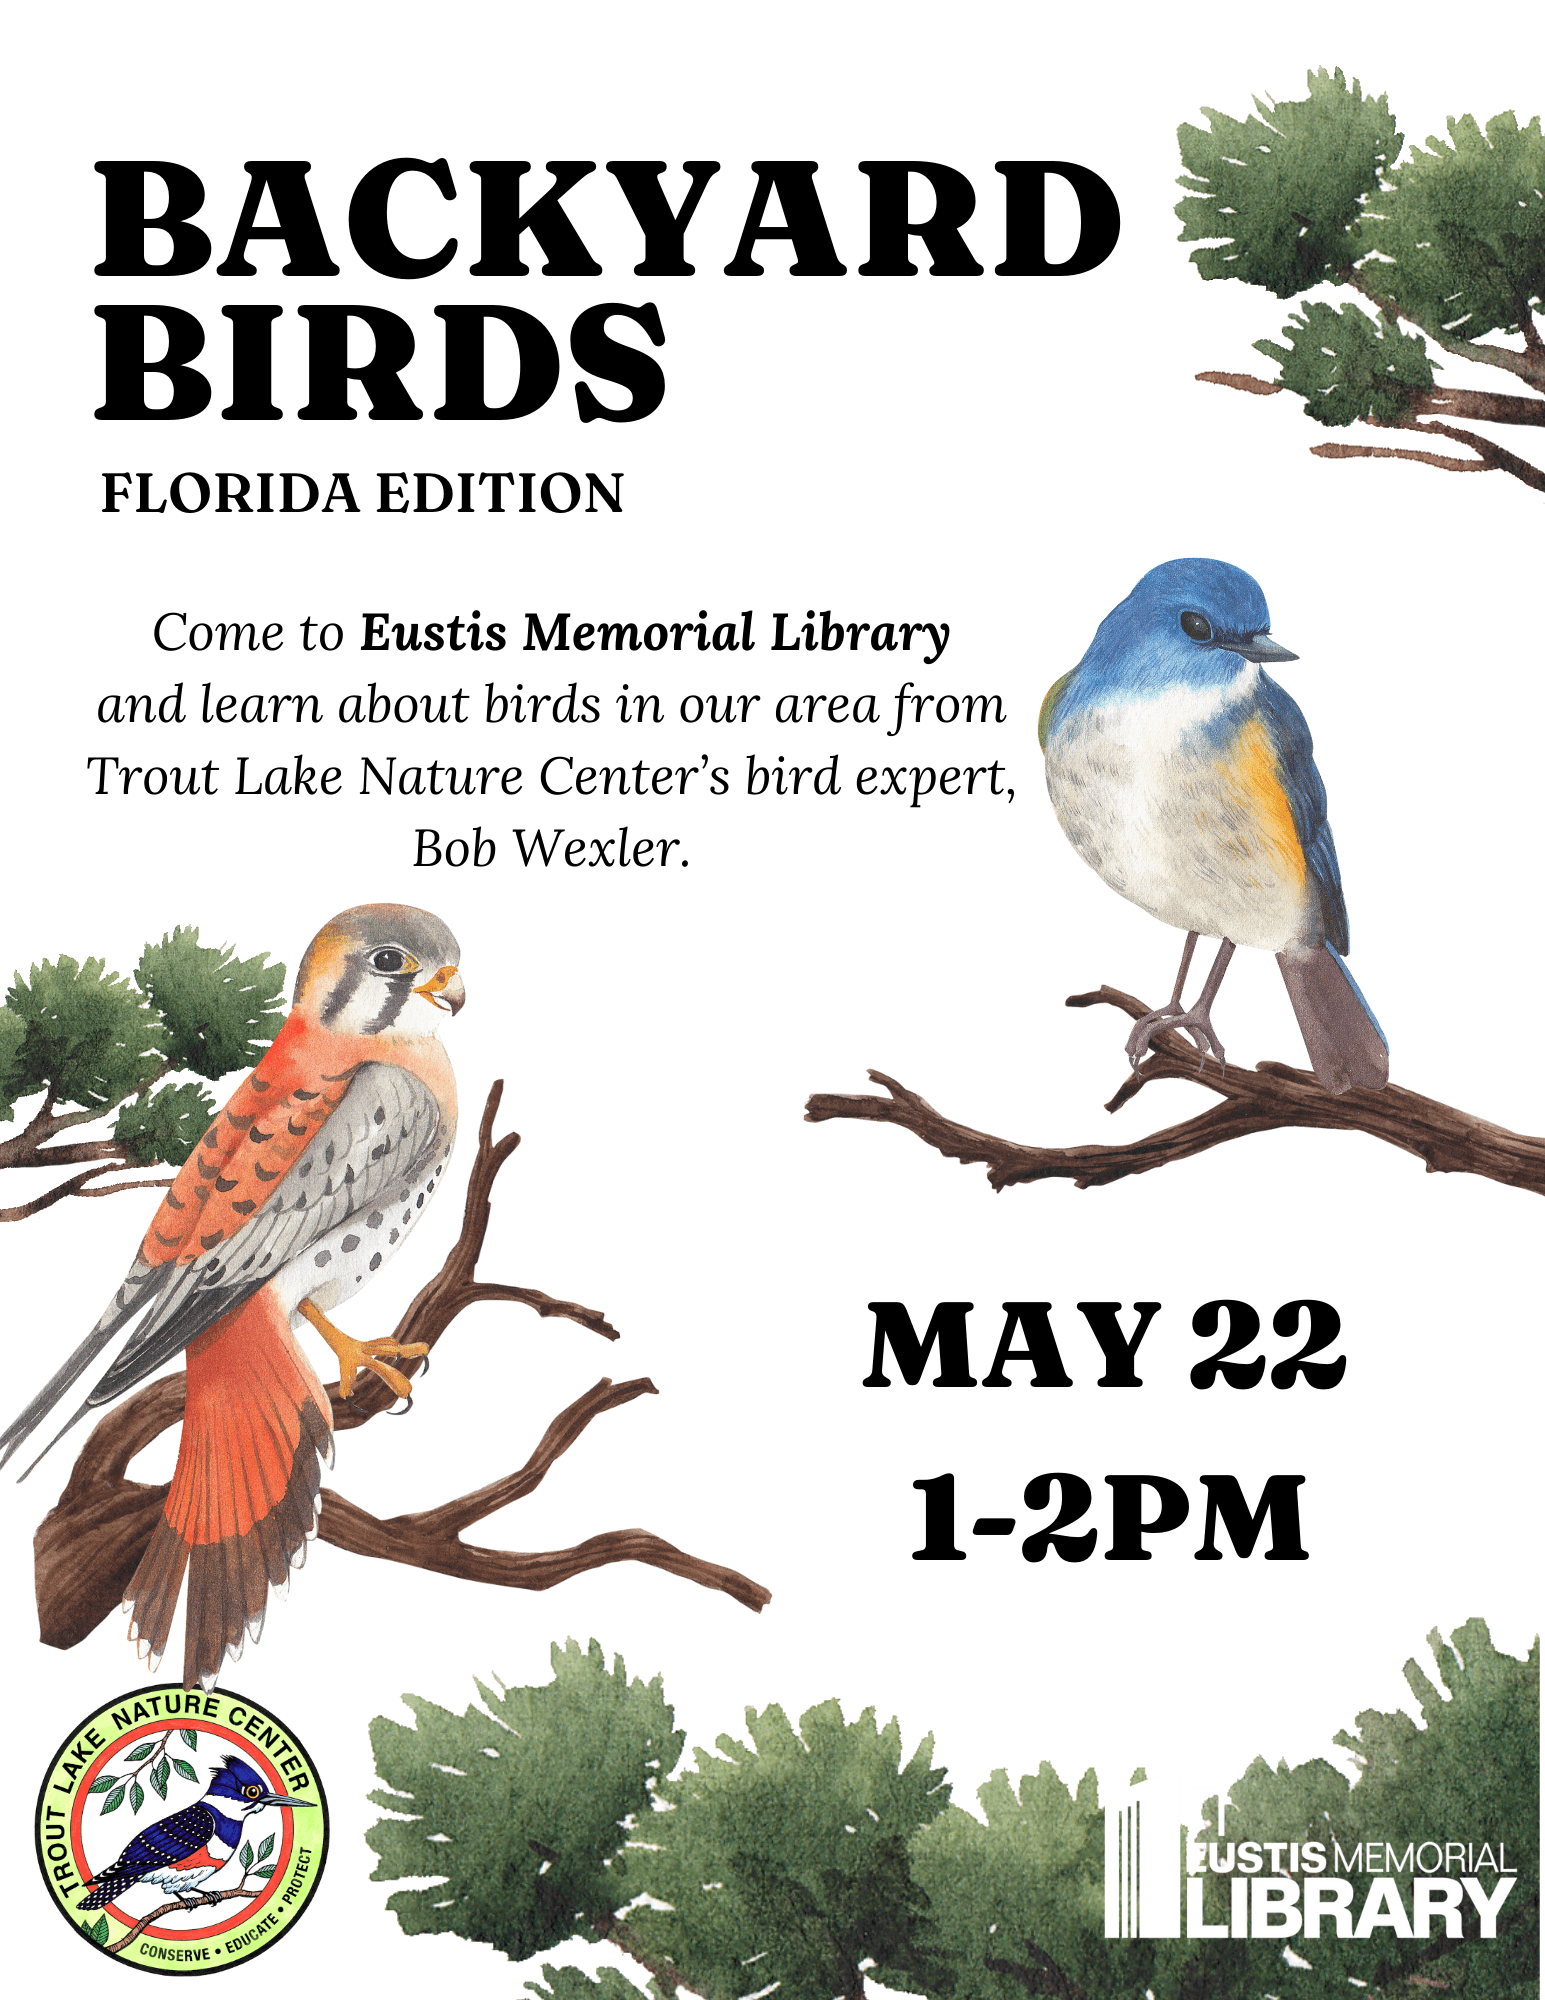 Event flyer with two birds sitting on branches.